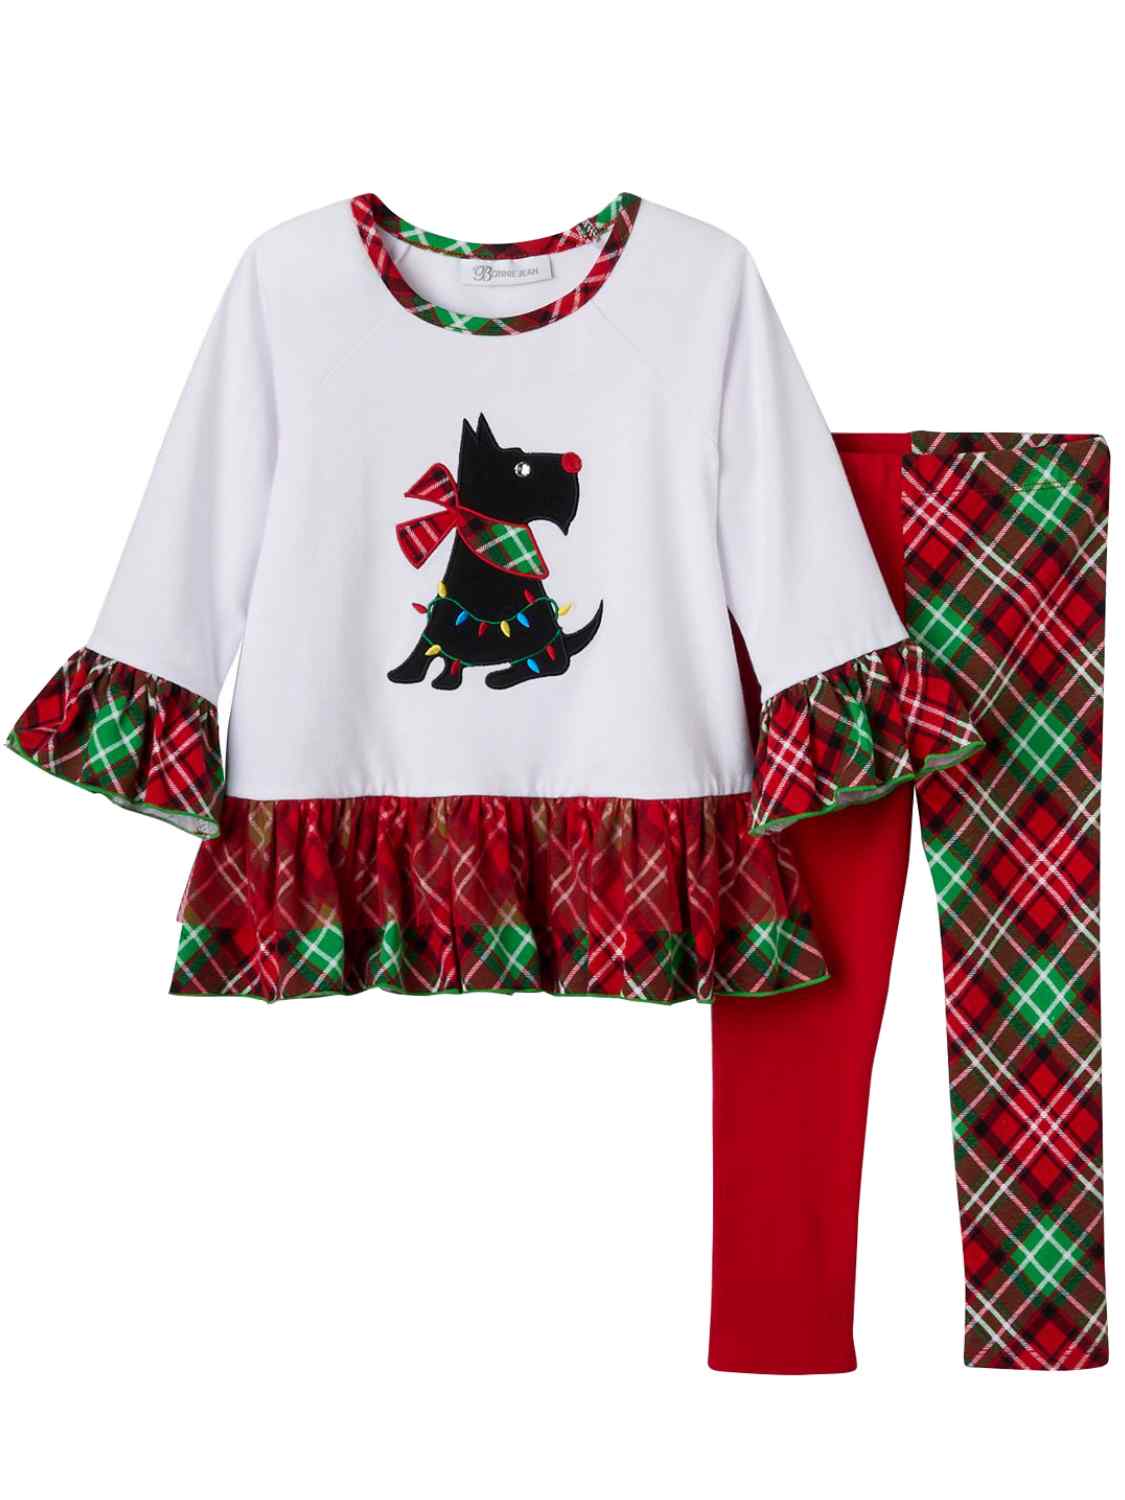 Bonnie Jean Infant & Toddler Girls Scottie Dog Holiday Outfit Ruffled Shirt & Leggings